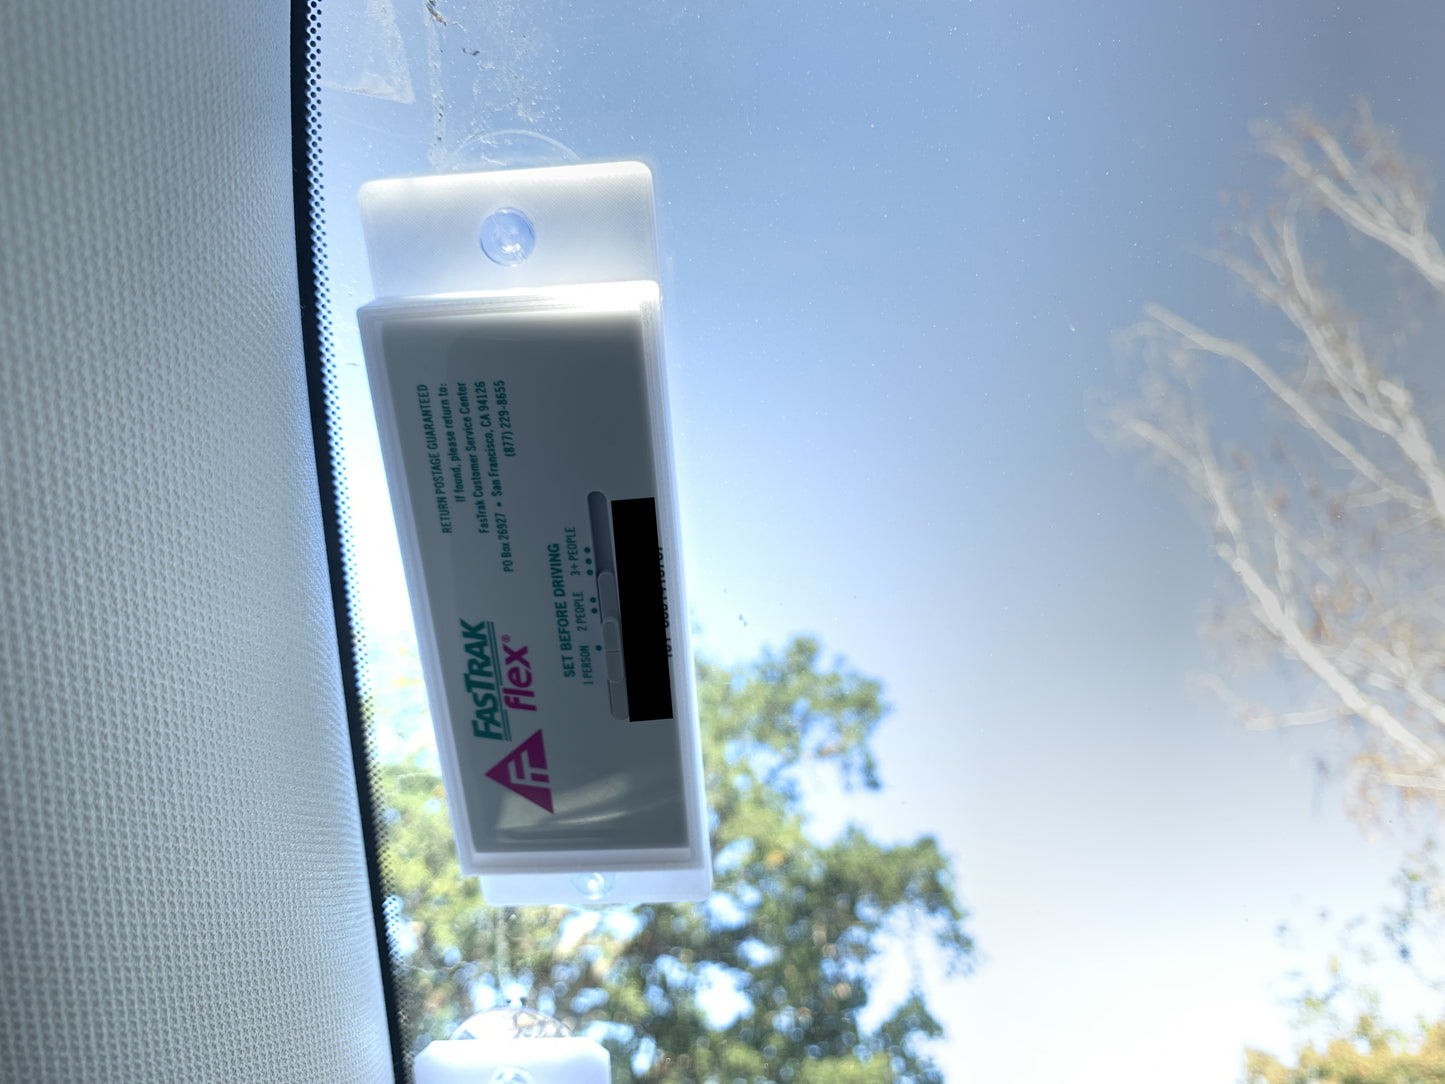 Fastrak Flex toll tag transponder holder with suction cup (white, 3d printed) California for your car.